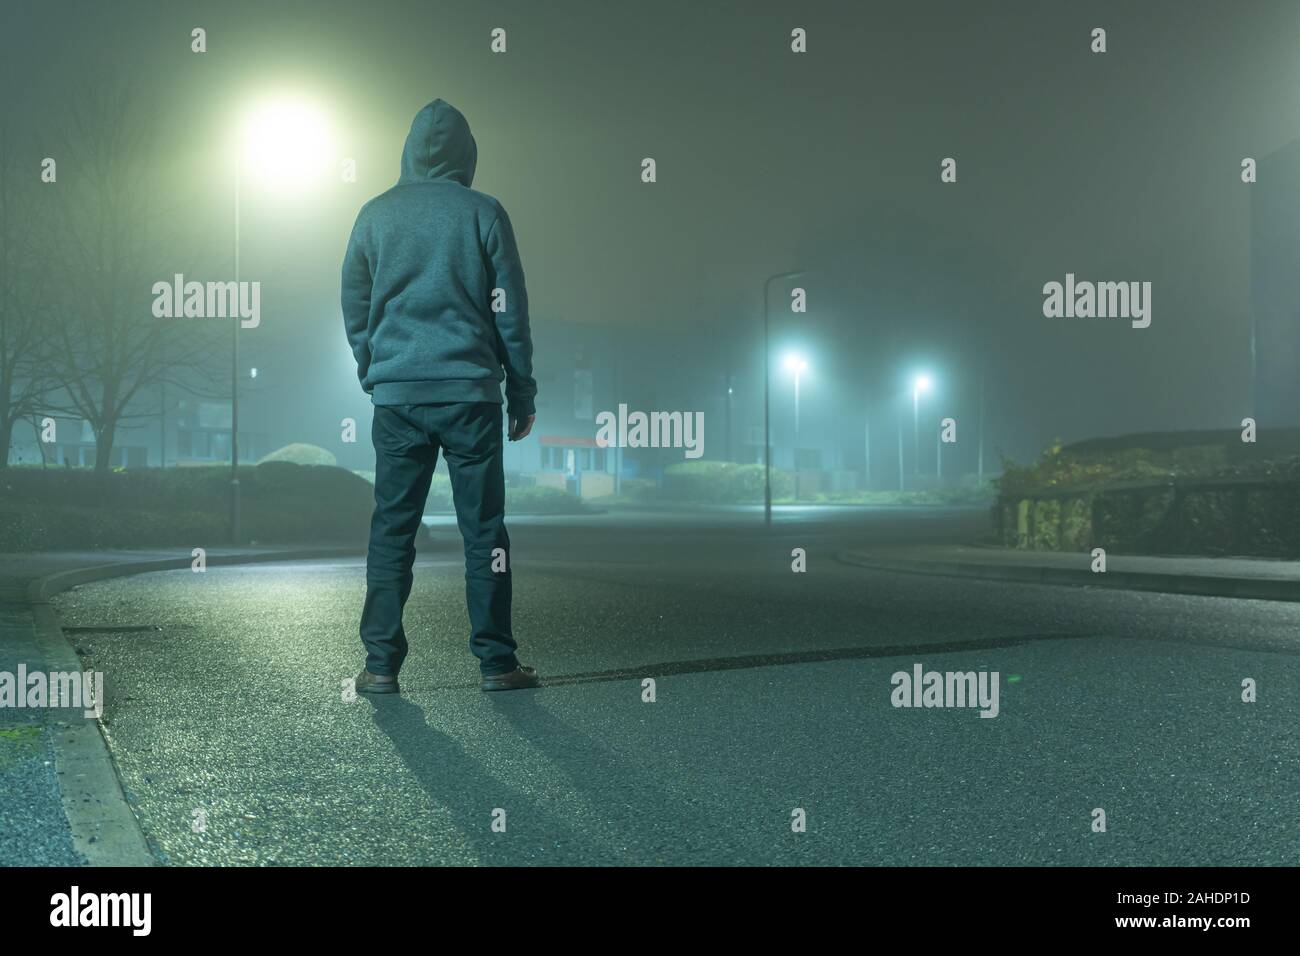 A mysterious hooded figure with back to camera, standing on a road in a light industrial urban area. On a moody, foogy, winters night Stock Photo